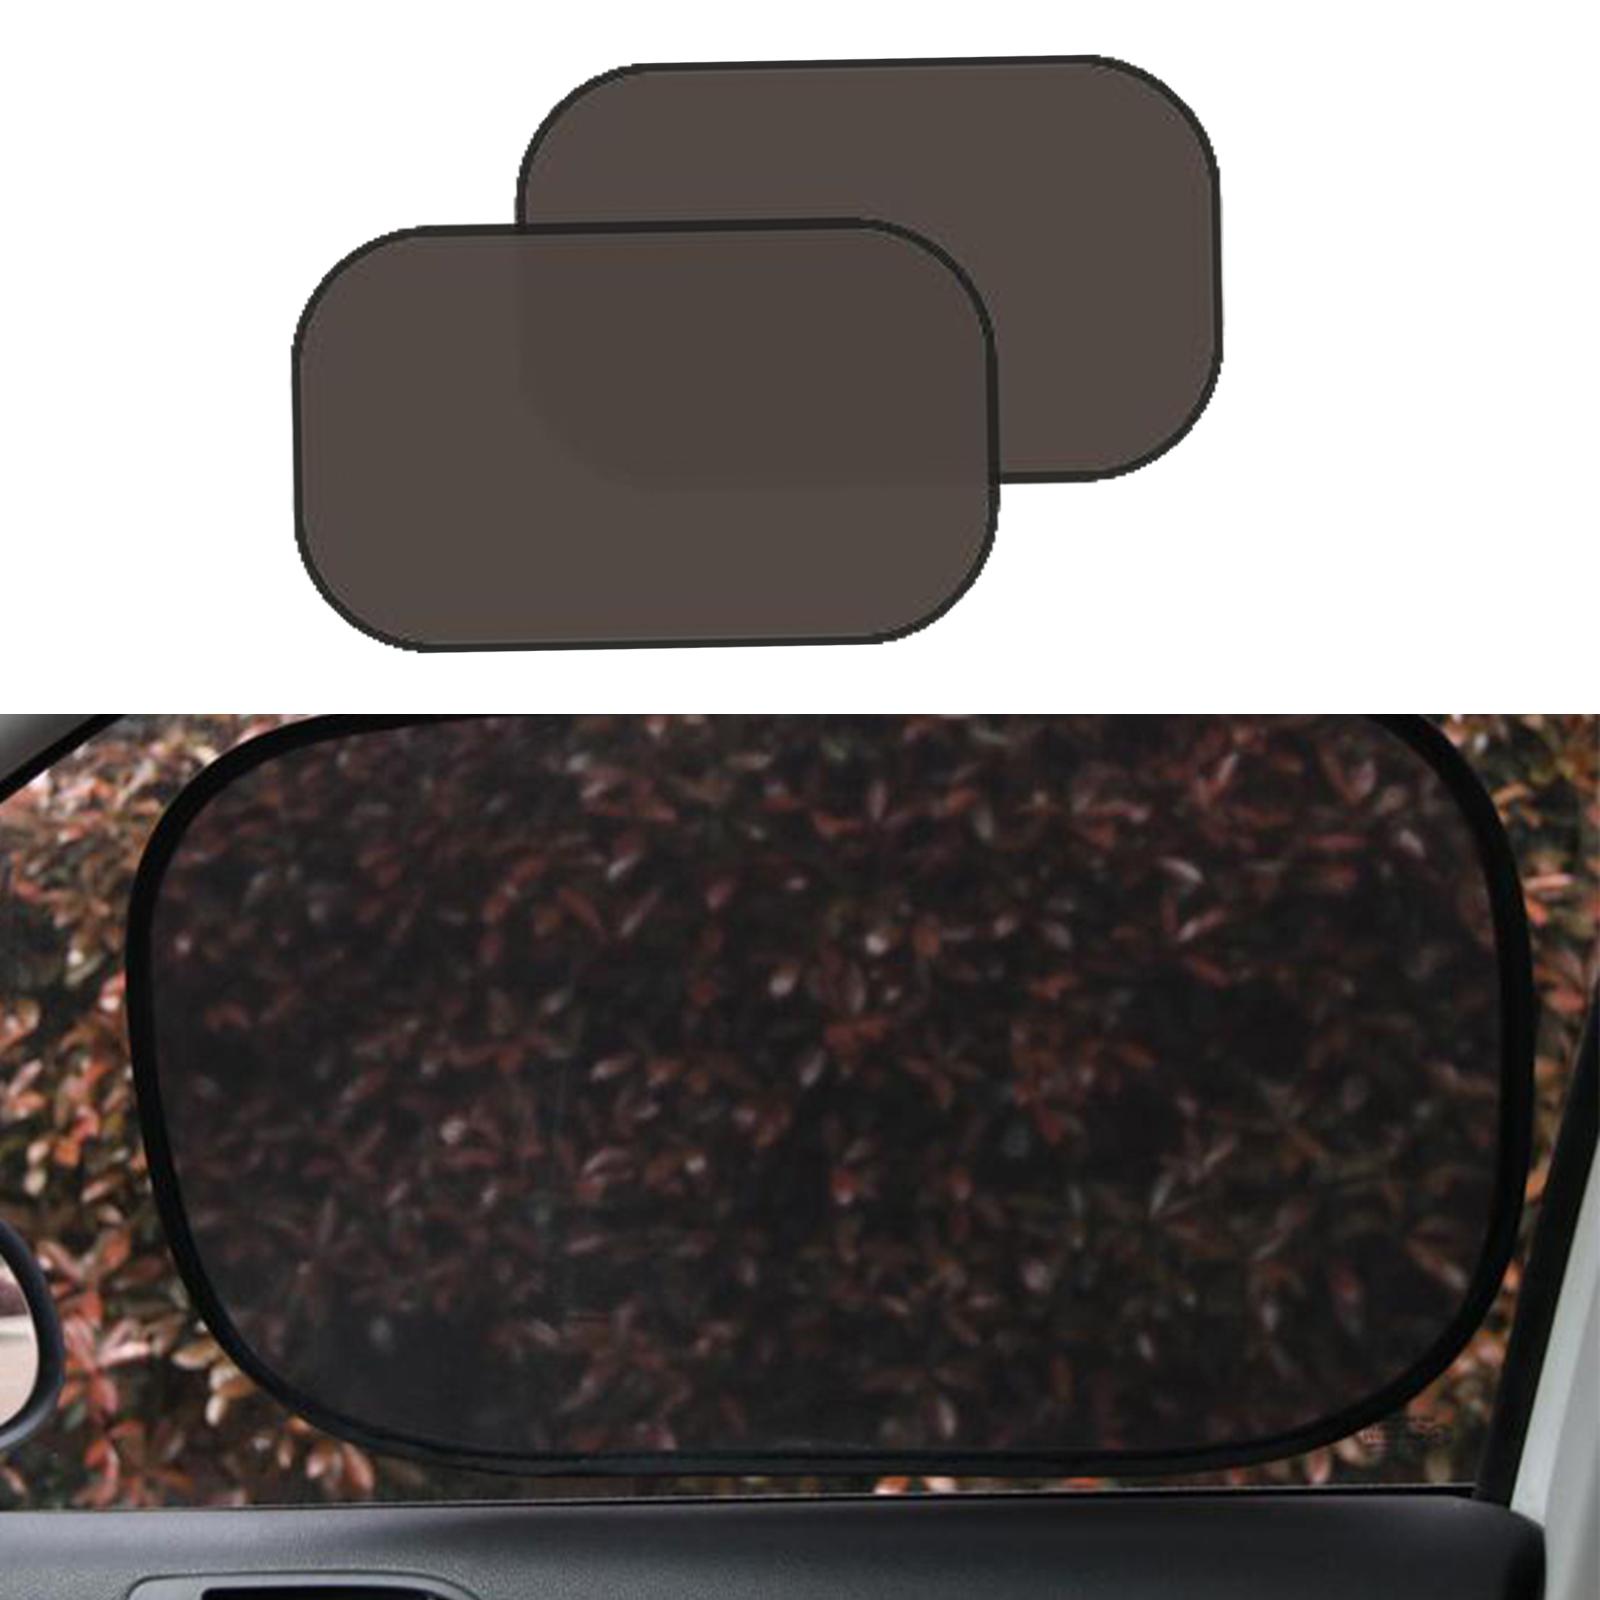 Car Window Sunshade Protection Professional Reusable Easily Install Foldable Clear 50x30cm